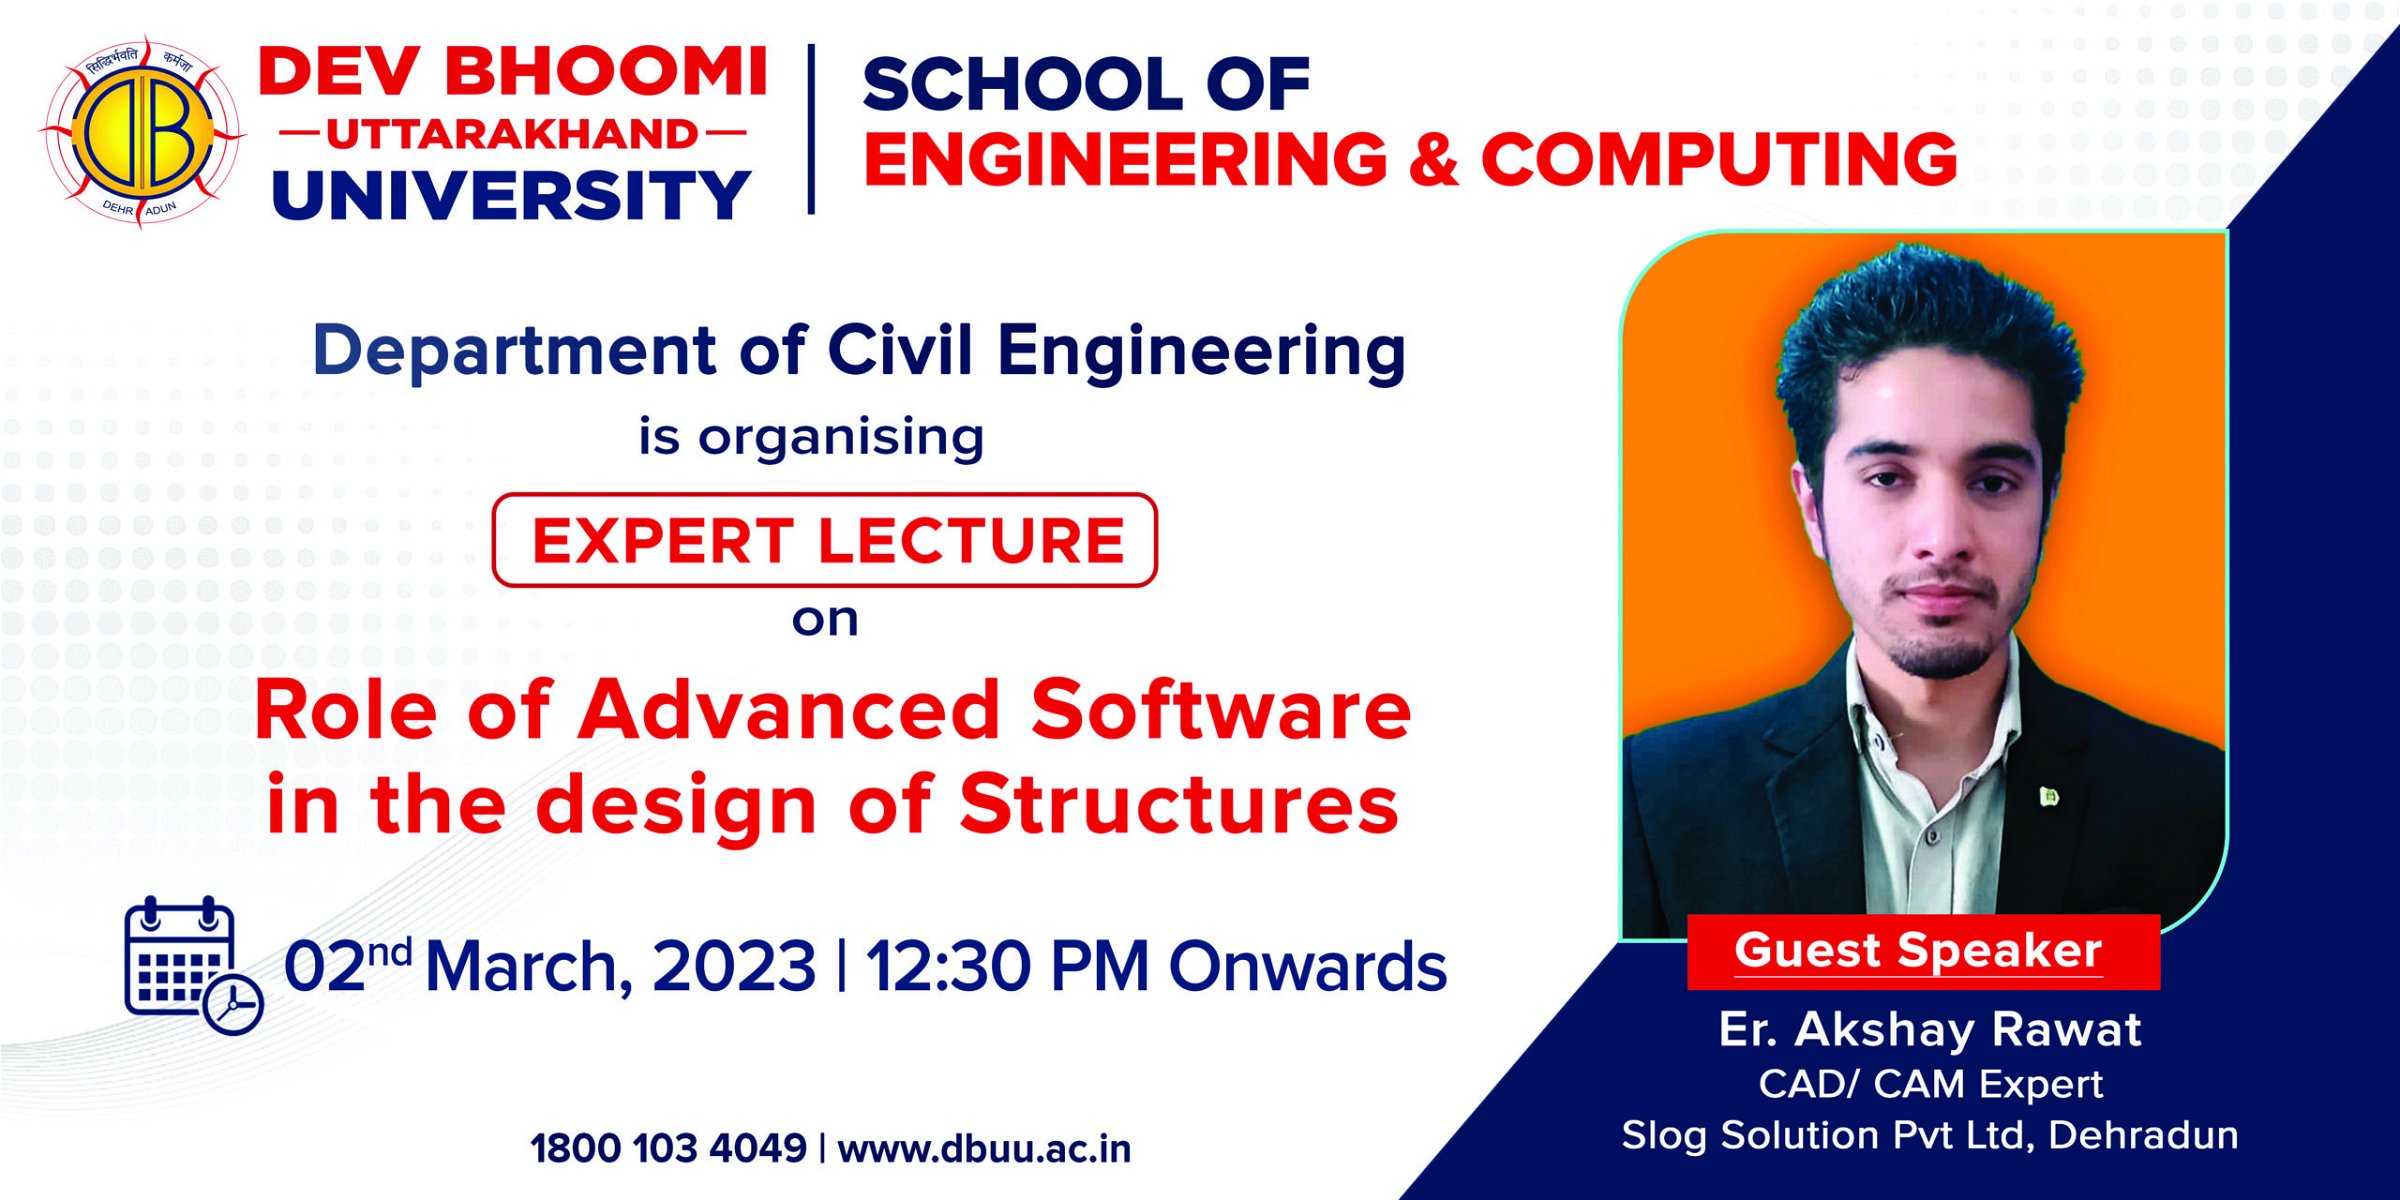 Expert lecture on  “Role of Advanced Software in the design of Structures”